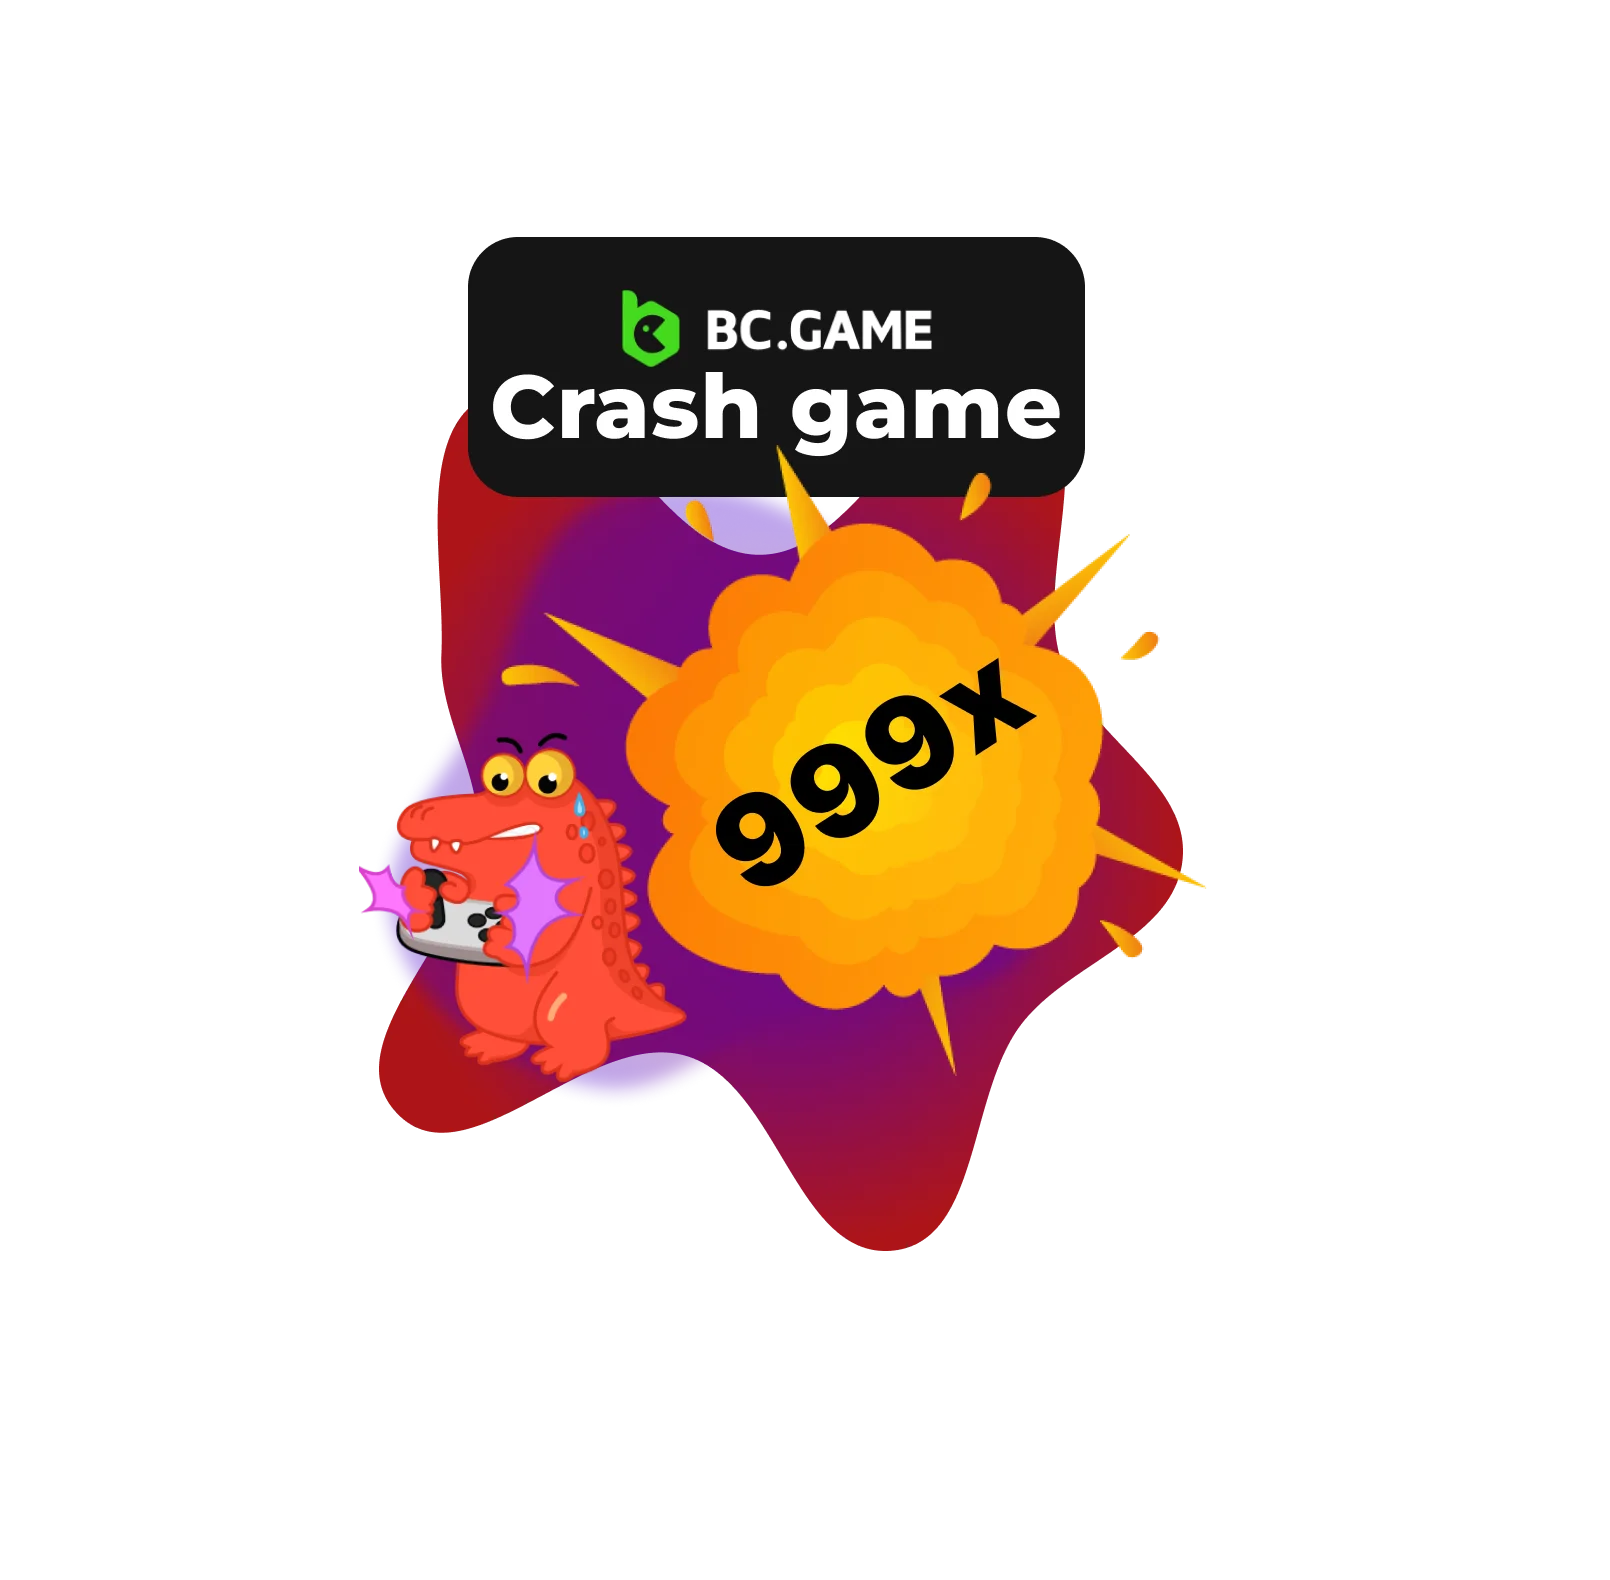 BC.Game crash banner for Iran, with a dynamic graph display with an ascending line, showing the excitement of the crash game experience.